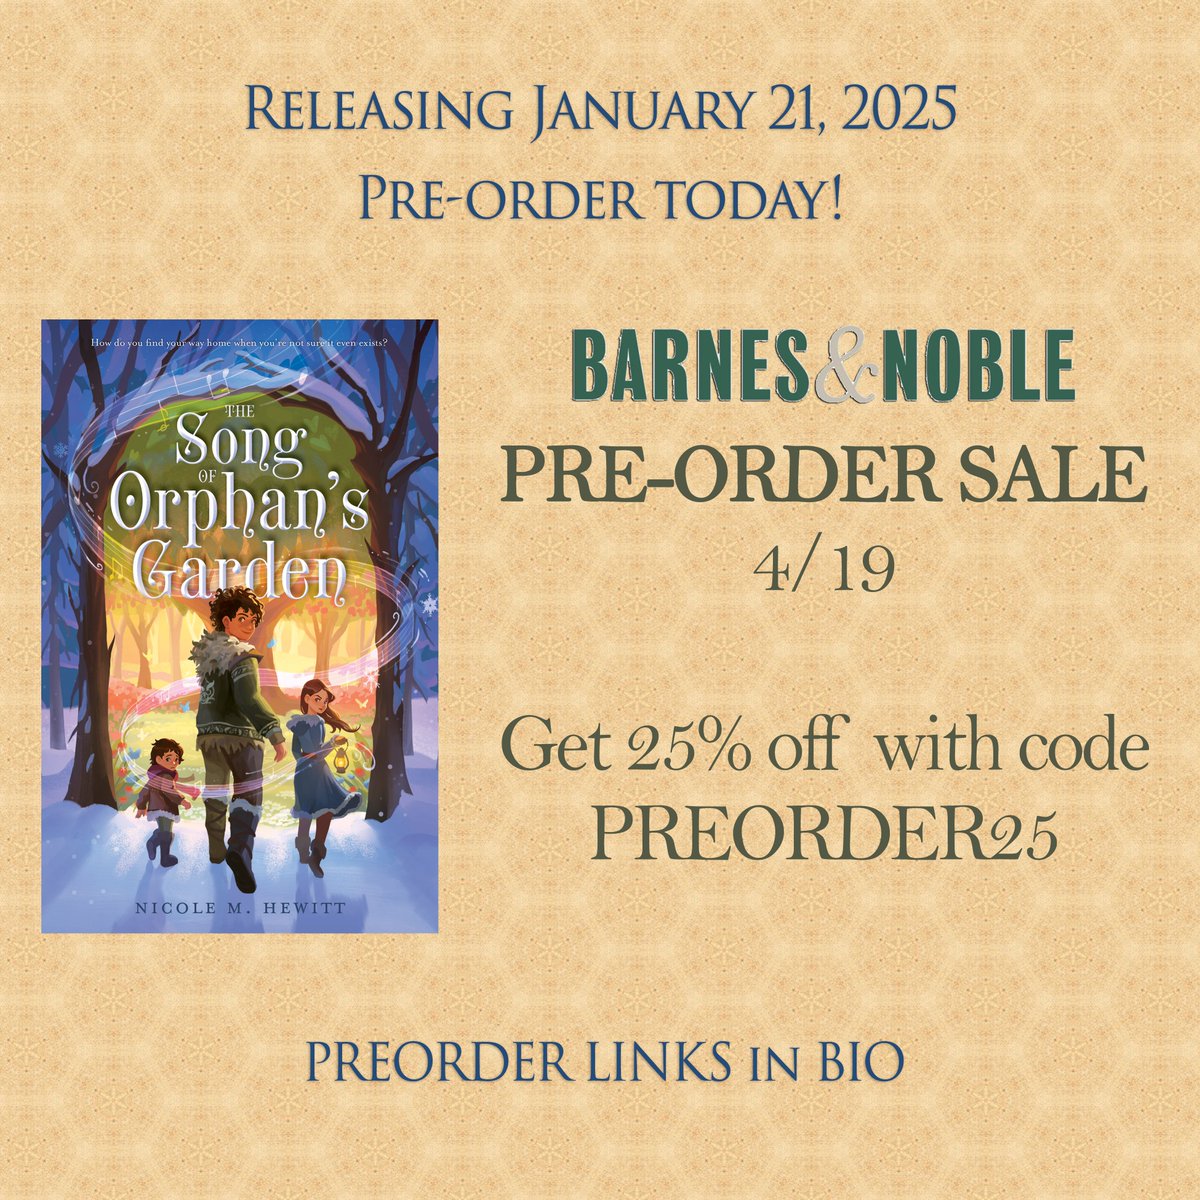 It's not too early to preorder THE SONG OF ORPHAN'S GARDEN! 👀 In fact, if you take advantage of Barnes & Noble's preorder sale today, you'll let B&N know there's interest in the book, and it will be more likely to get into stores come January! Check my bio for preorder links!